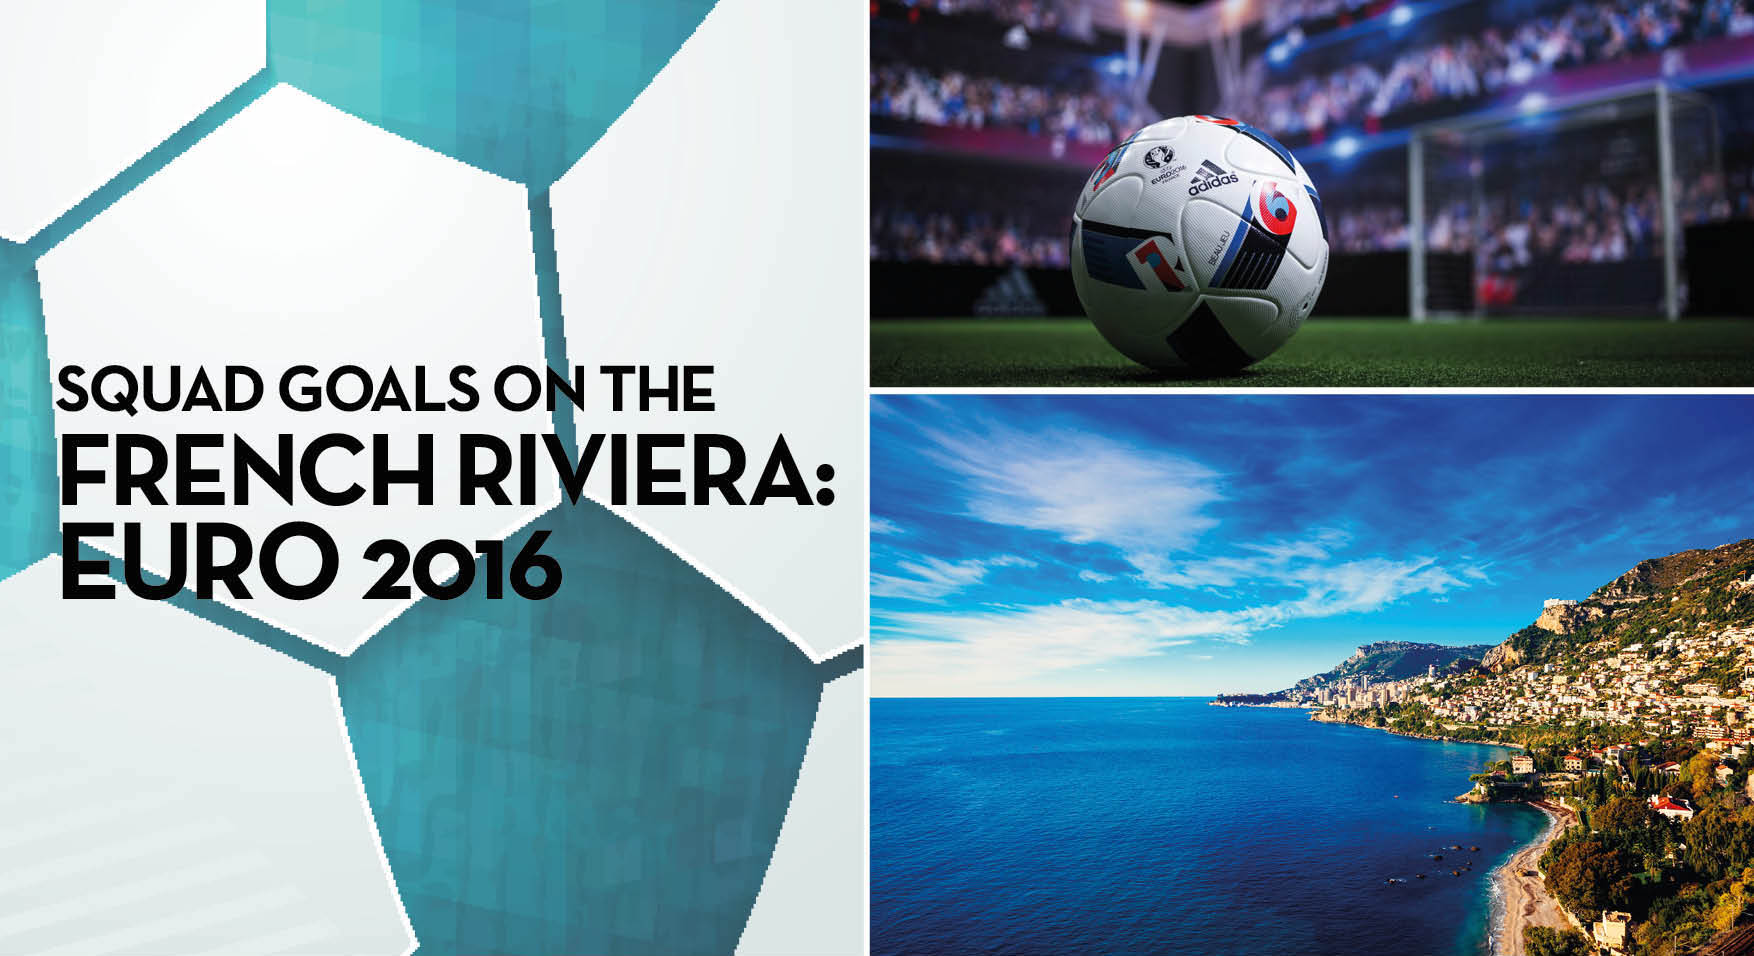 UEFA EURO 2016: Squad goals on the French Riviera this June